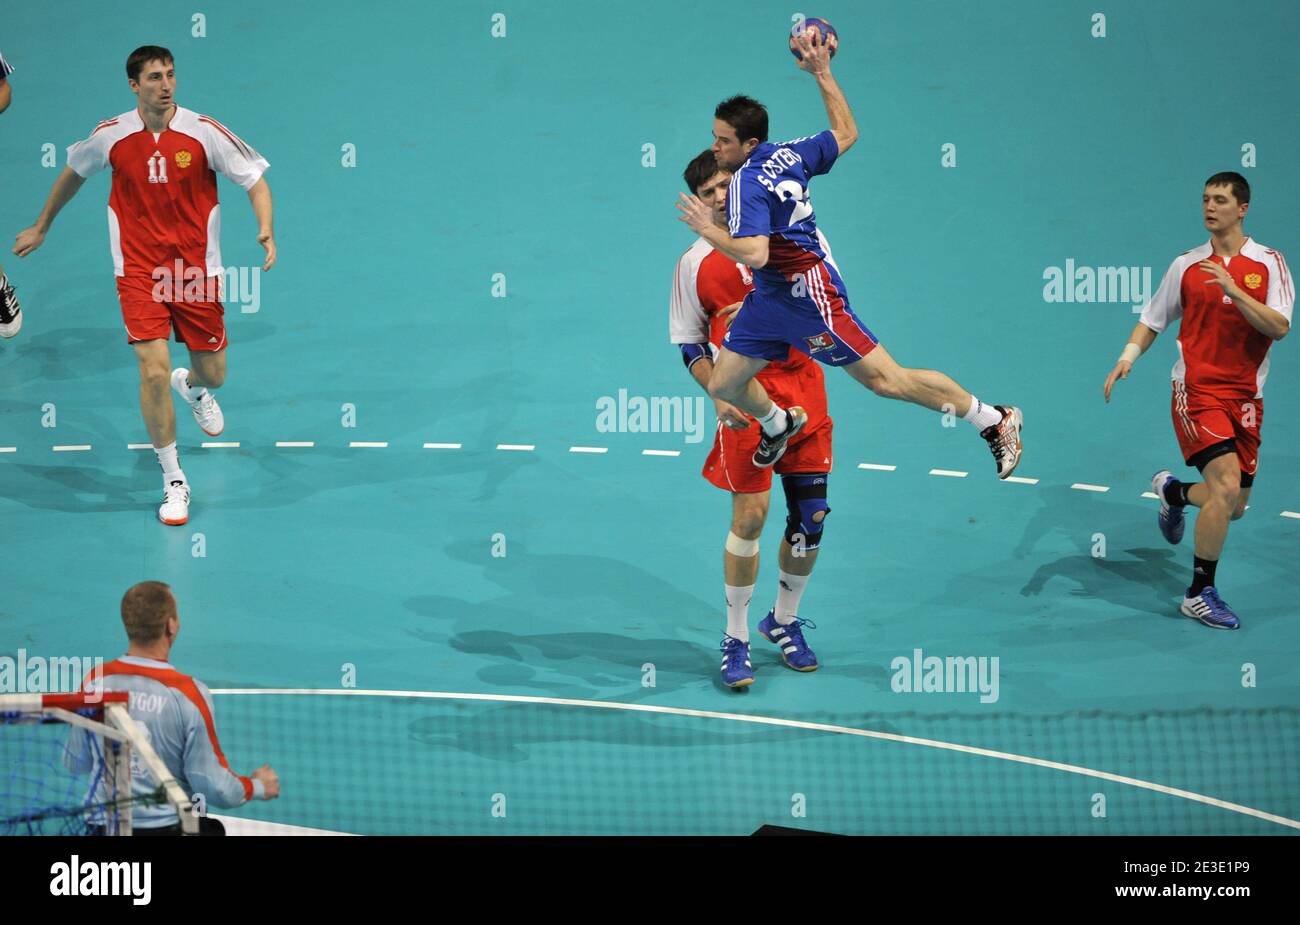 French Sebastien Ostertag competes during the Paris' Handball tournament final match, France vs Russia at the Palais Omnisport of Paris-Bercy in Paris. France won 32 to 30, on January 11, 2009. Photo by Christophe Guibbaud/ABACAPRESS.COM Stock Photo